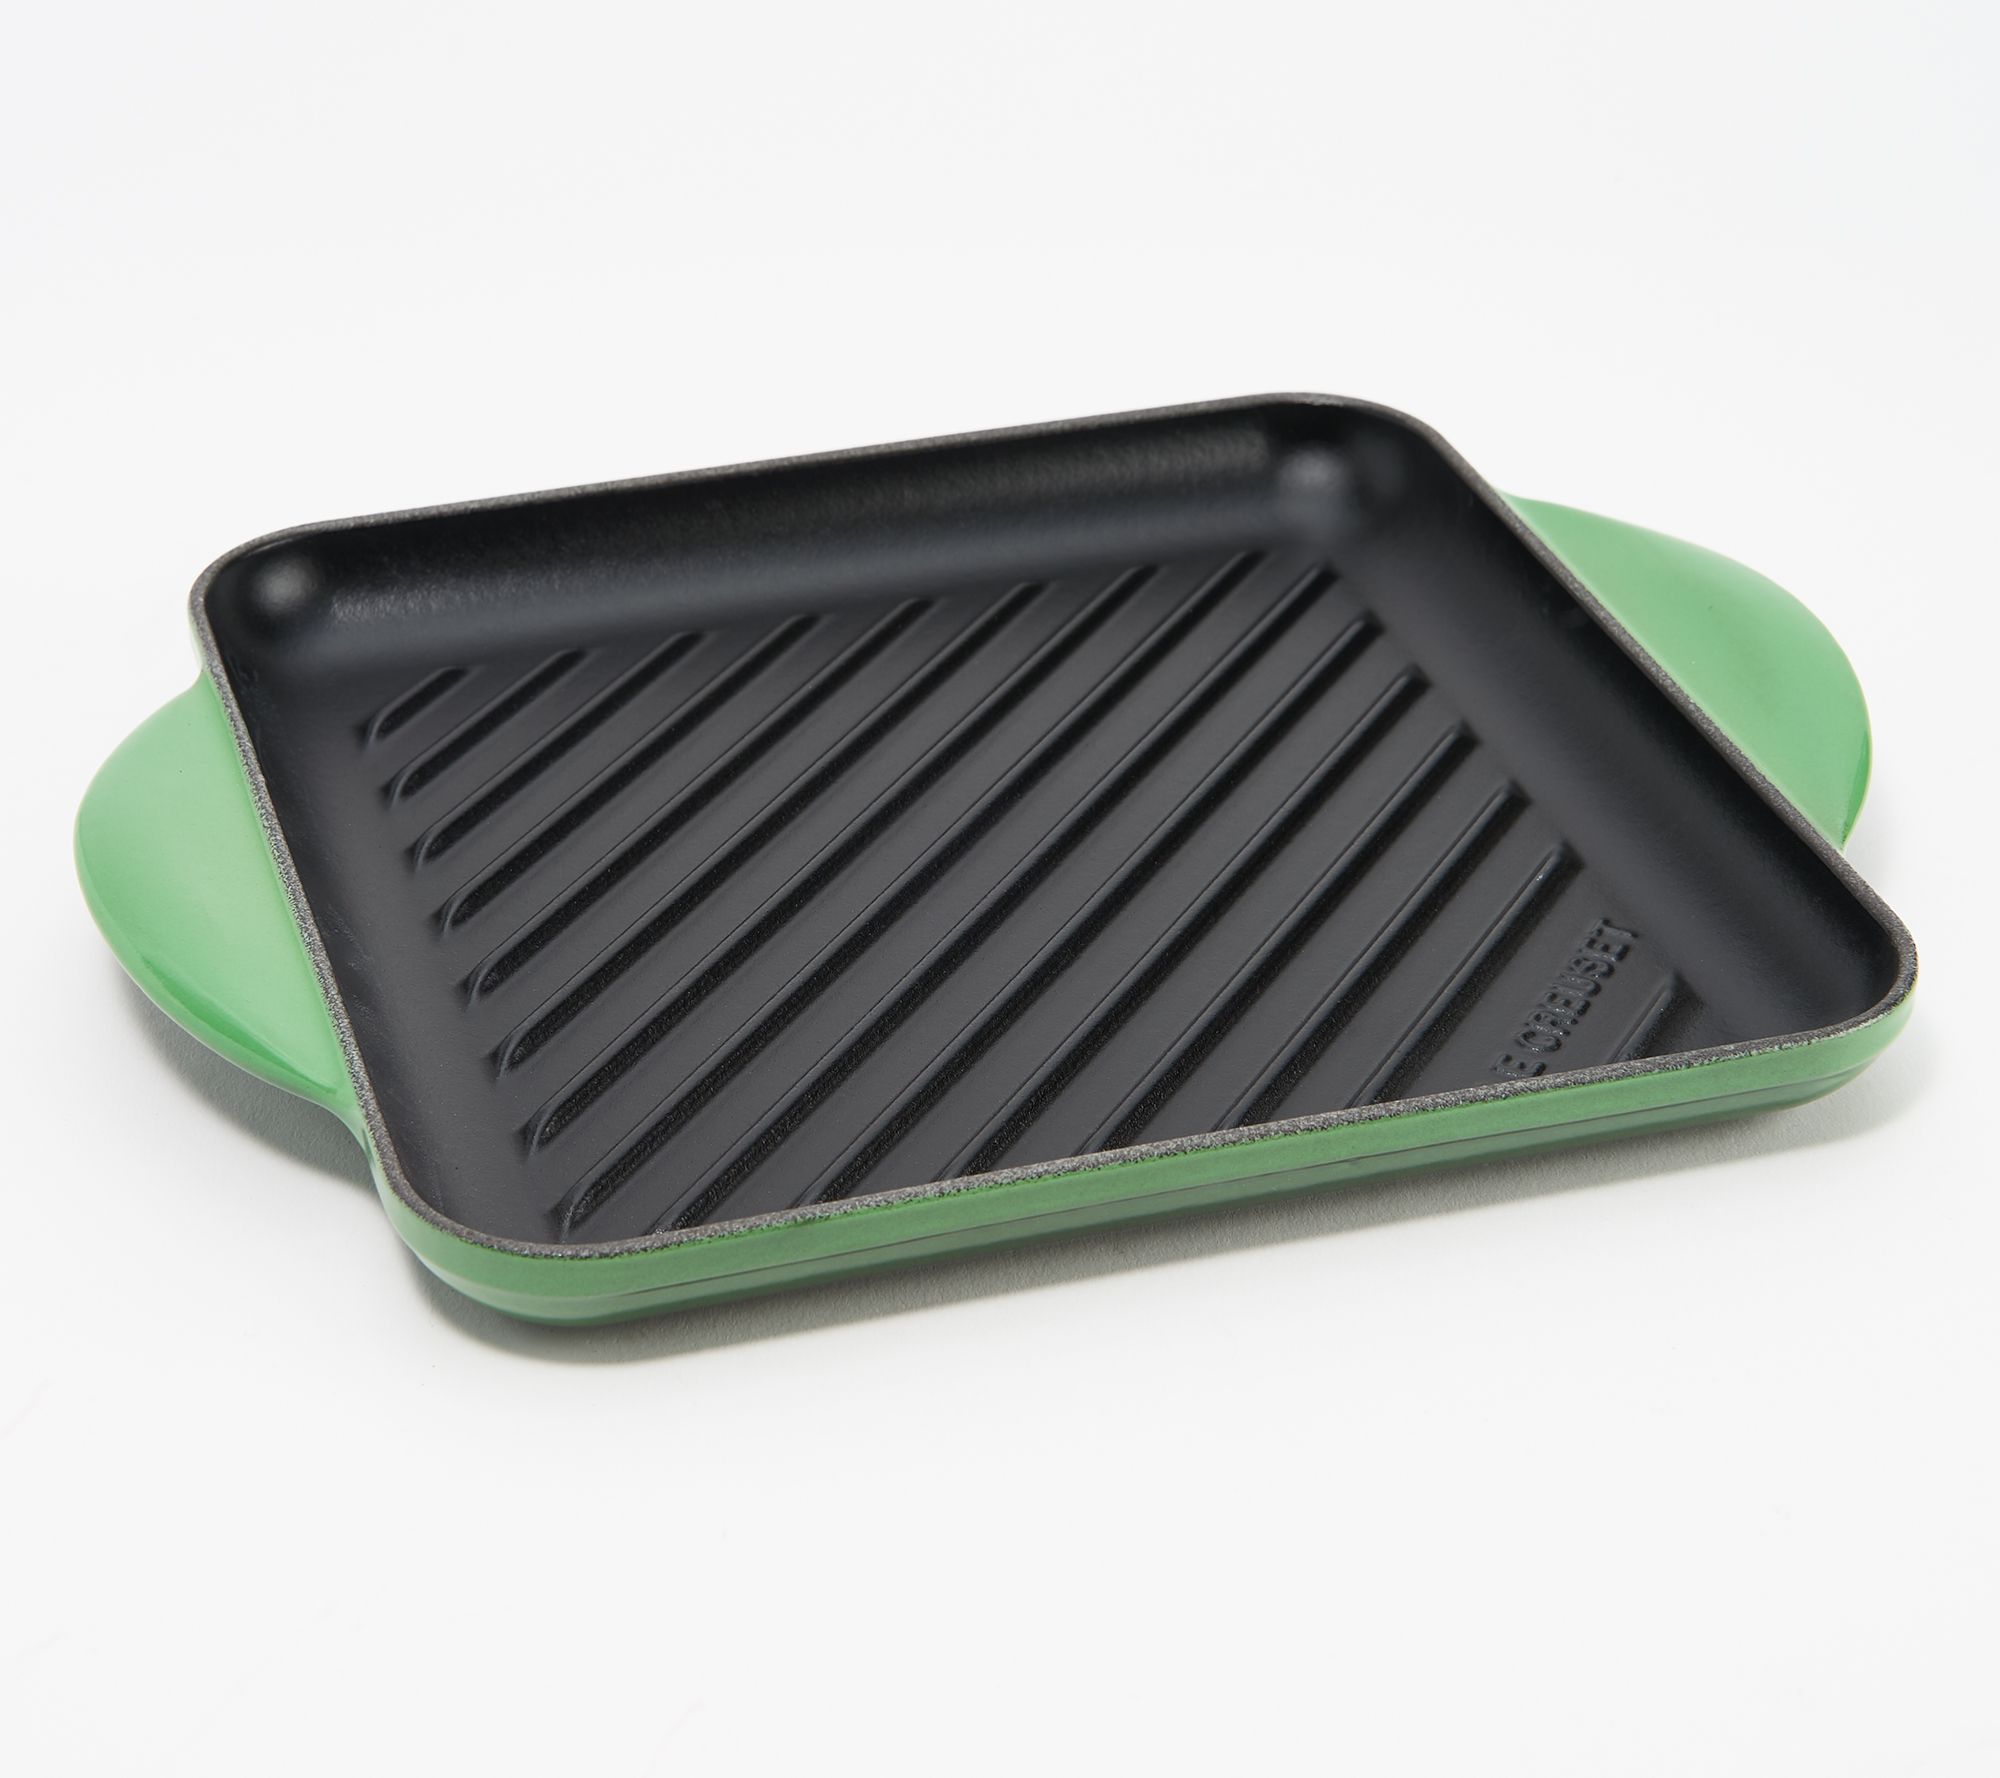 Cuisinart Enameled Cast Iron Grill Pan Review: A Great Grill